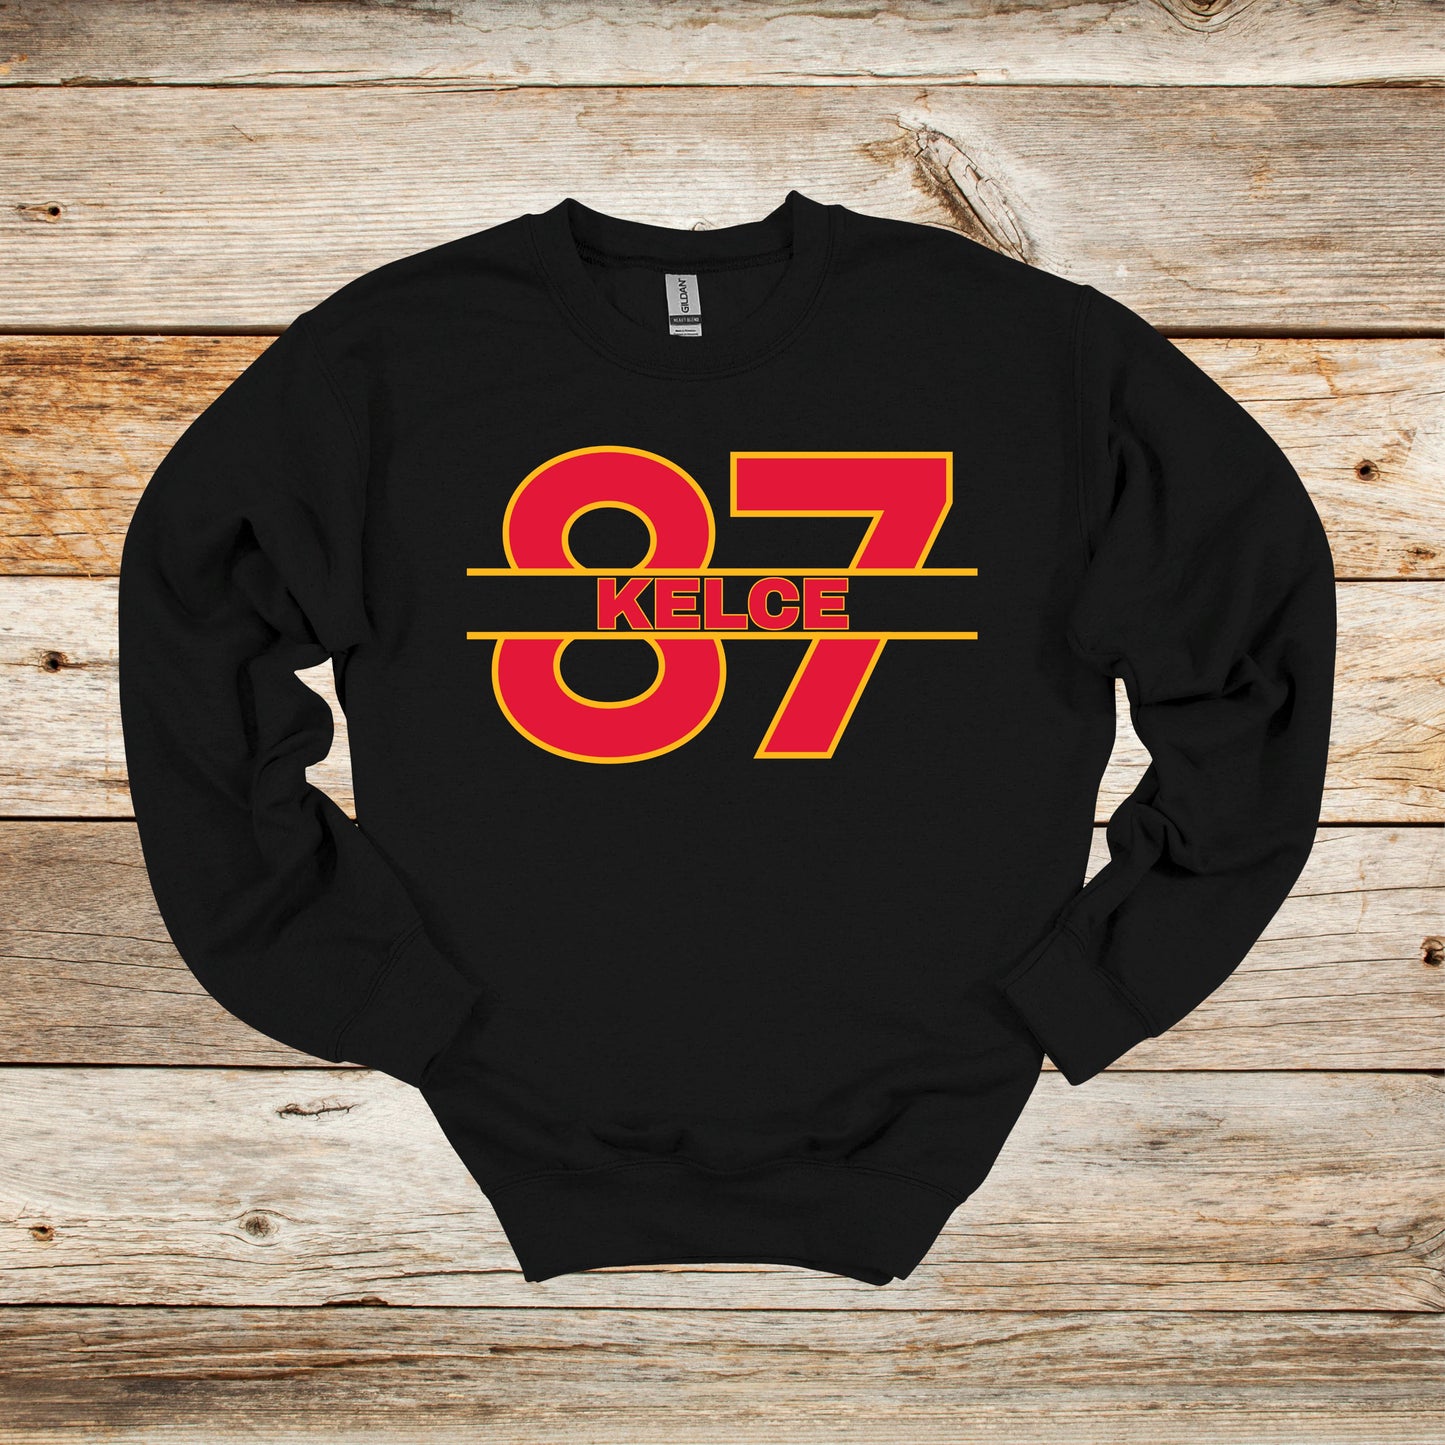 Football Crewneck and Hooded Sweatshirt - Chiefs Football - 87 Kelce - Adult and Children's Tee Shirts - Sports Hooded Sweatshirt Graphic Avenue Crewneck Sweatshirt Black Adult Small